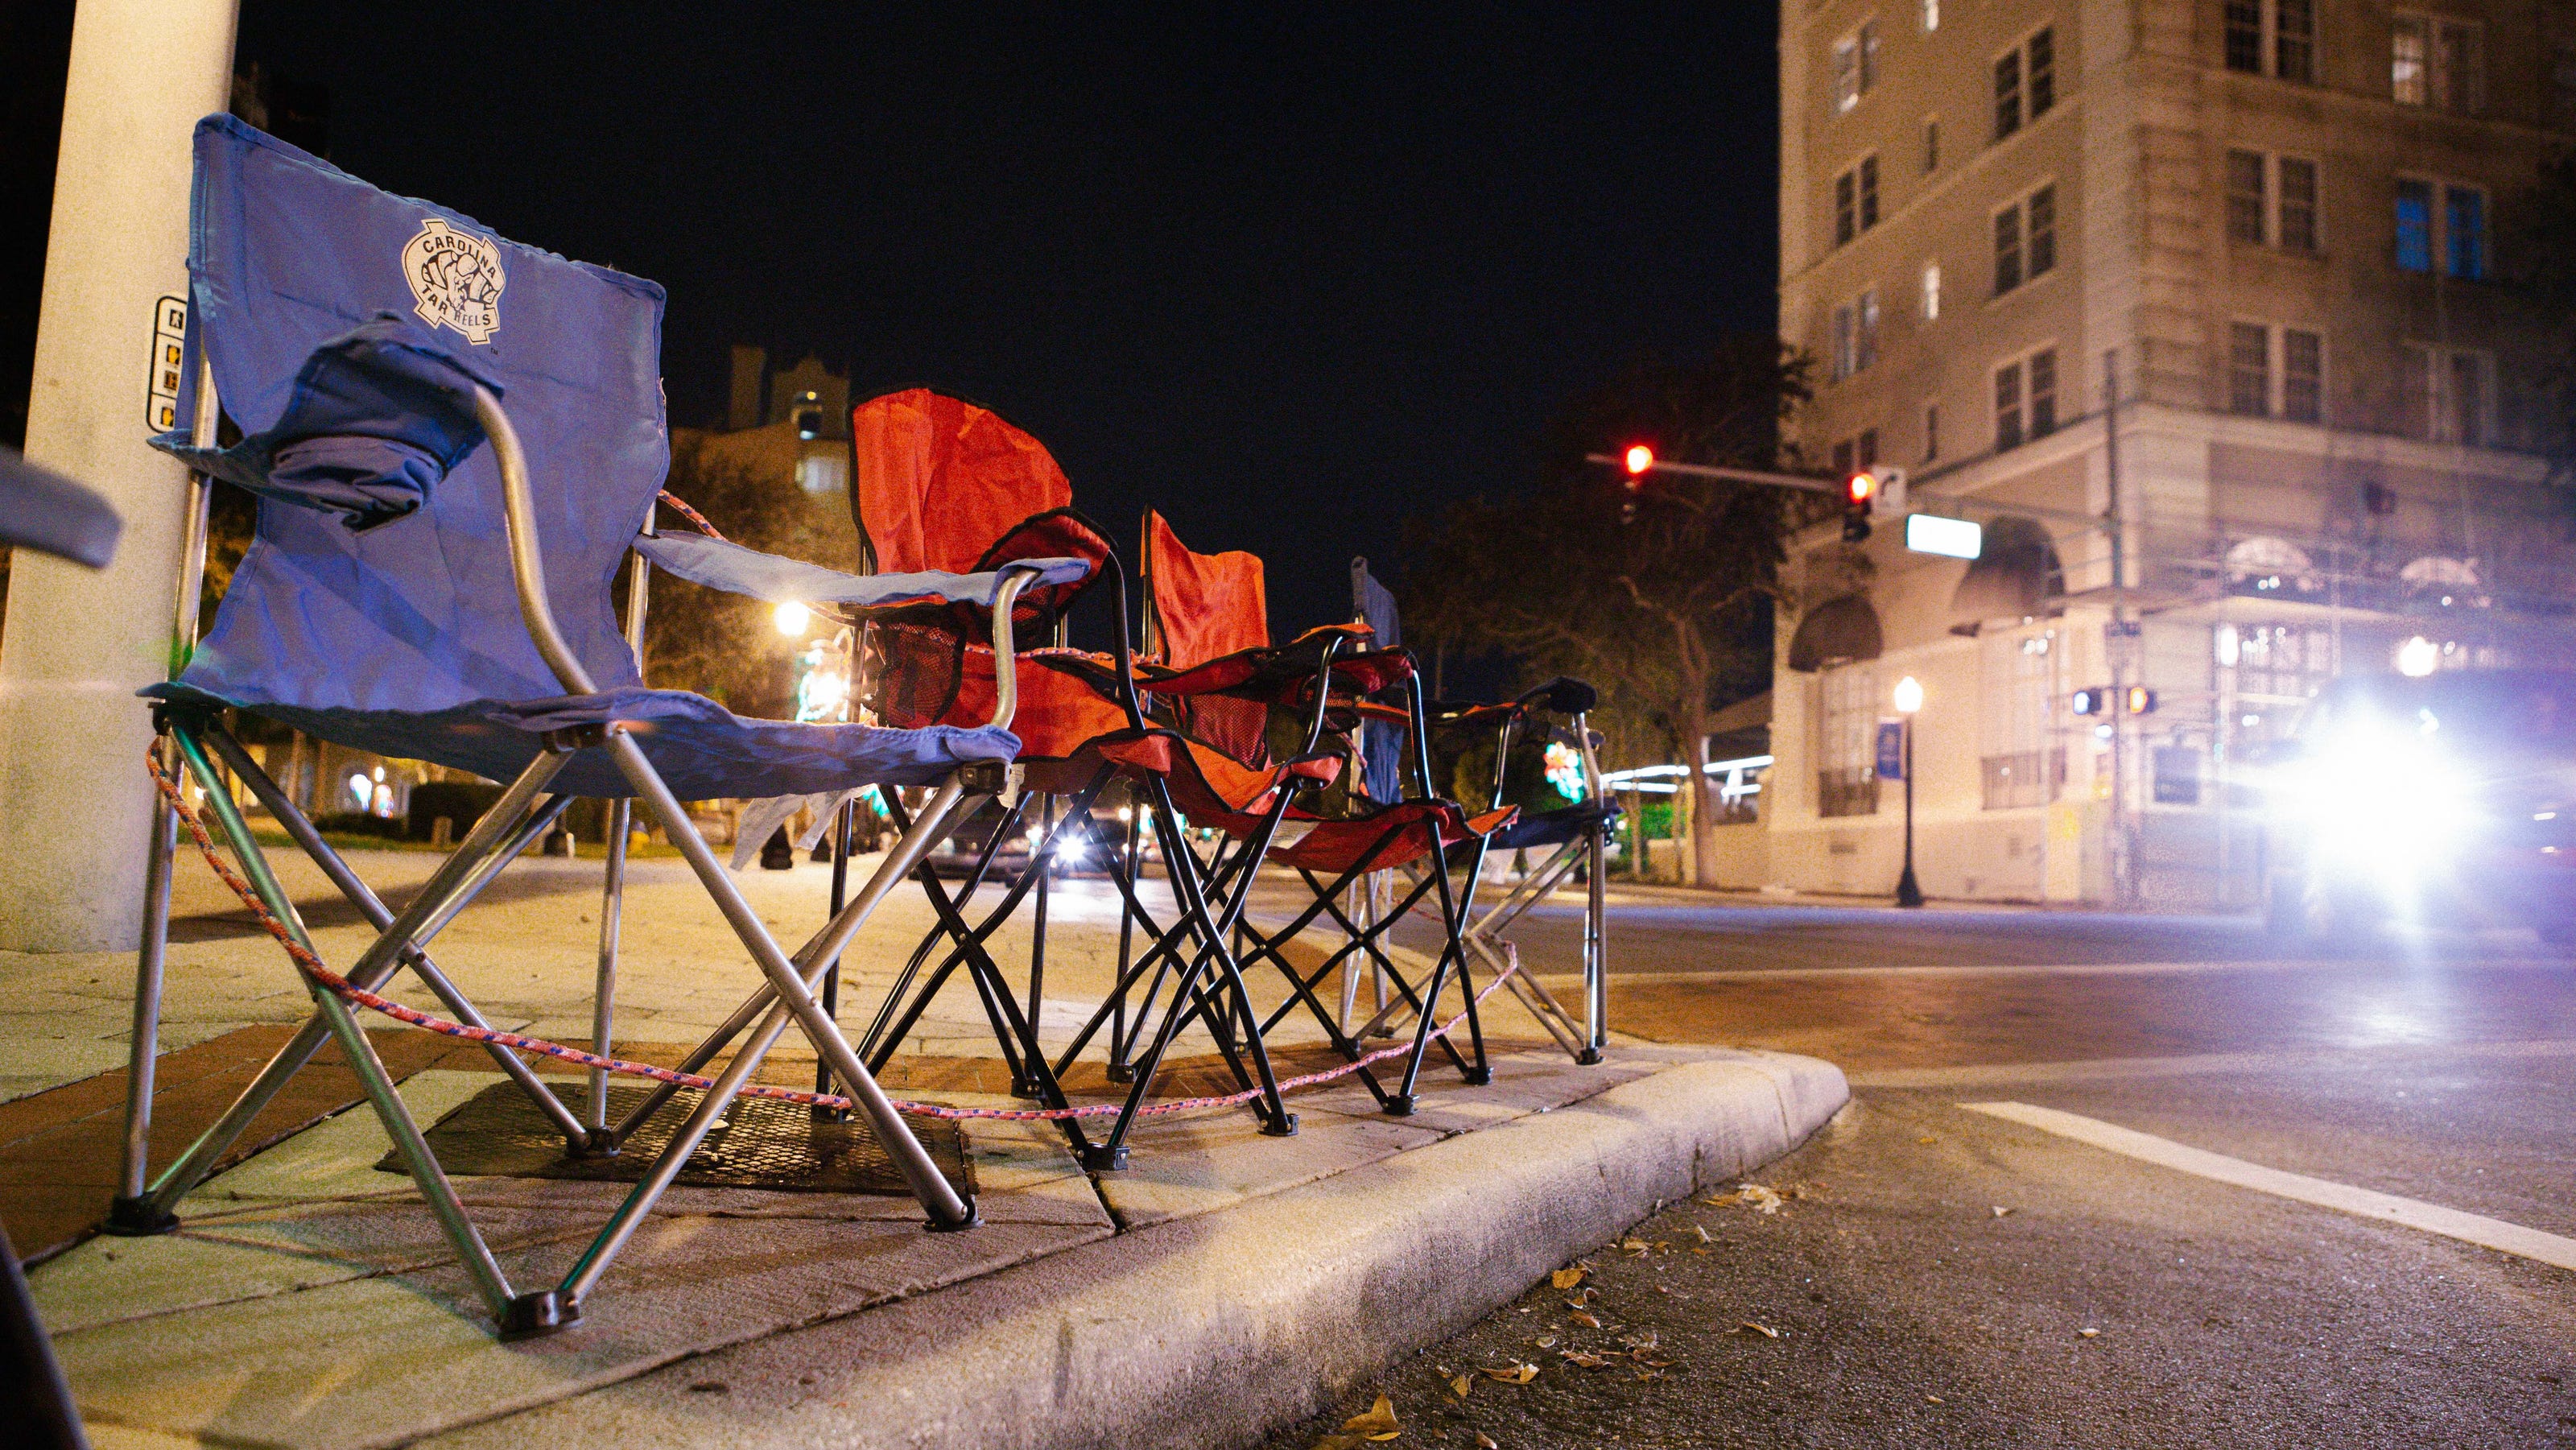 Lakeland discourages setting up chairs to save spots along parade route